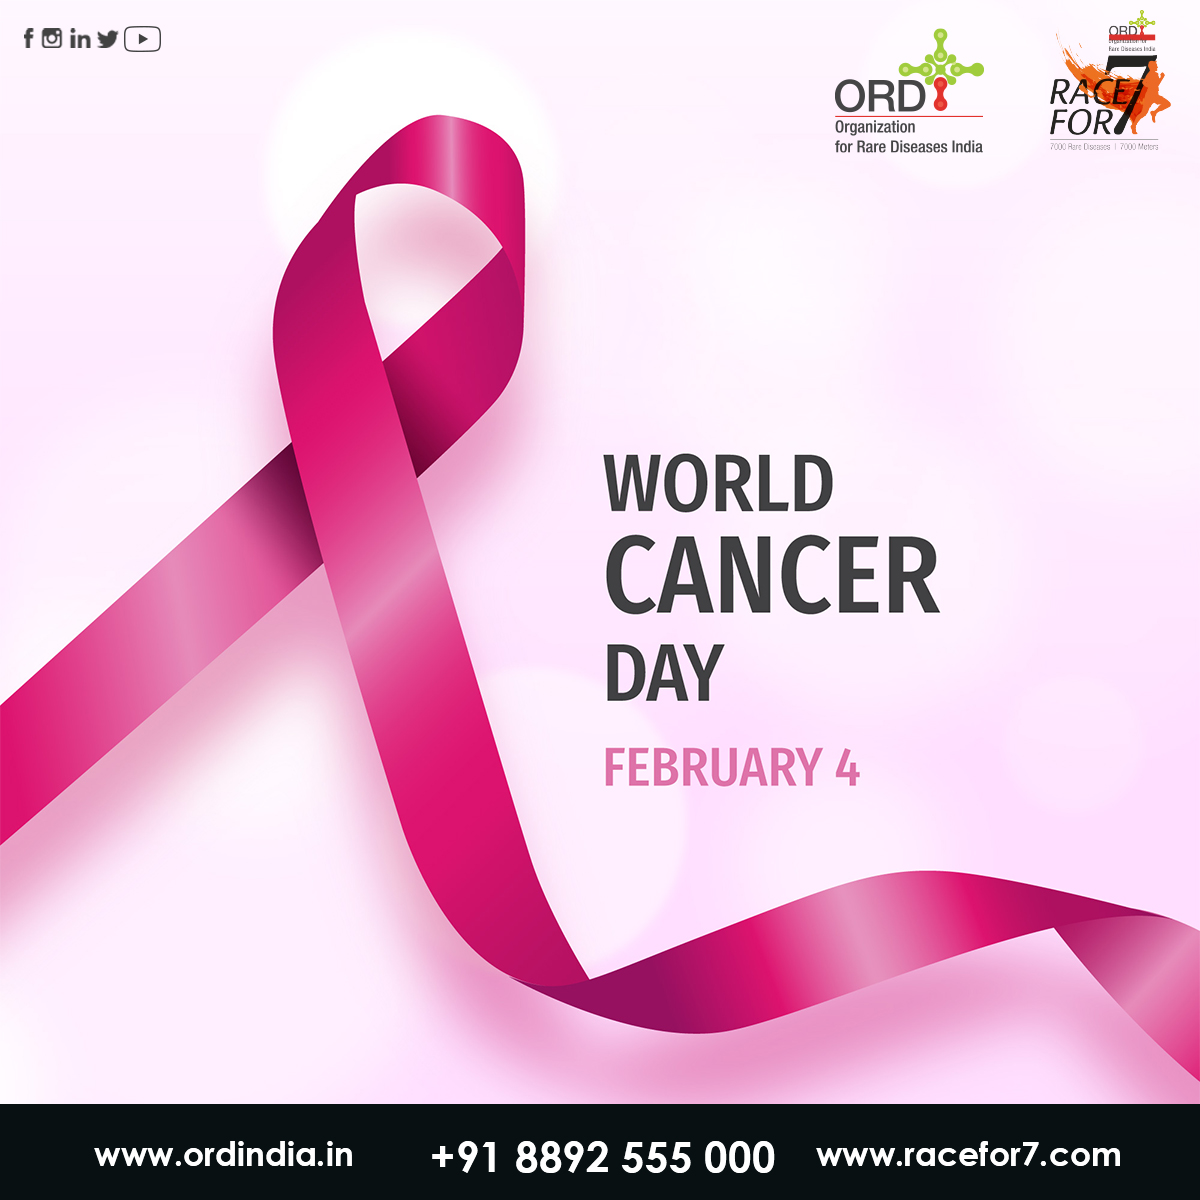 World Cancer Day 4th February ORD India